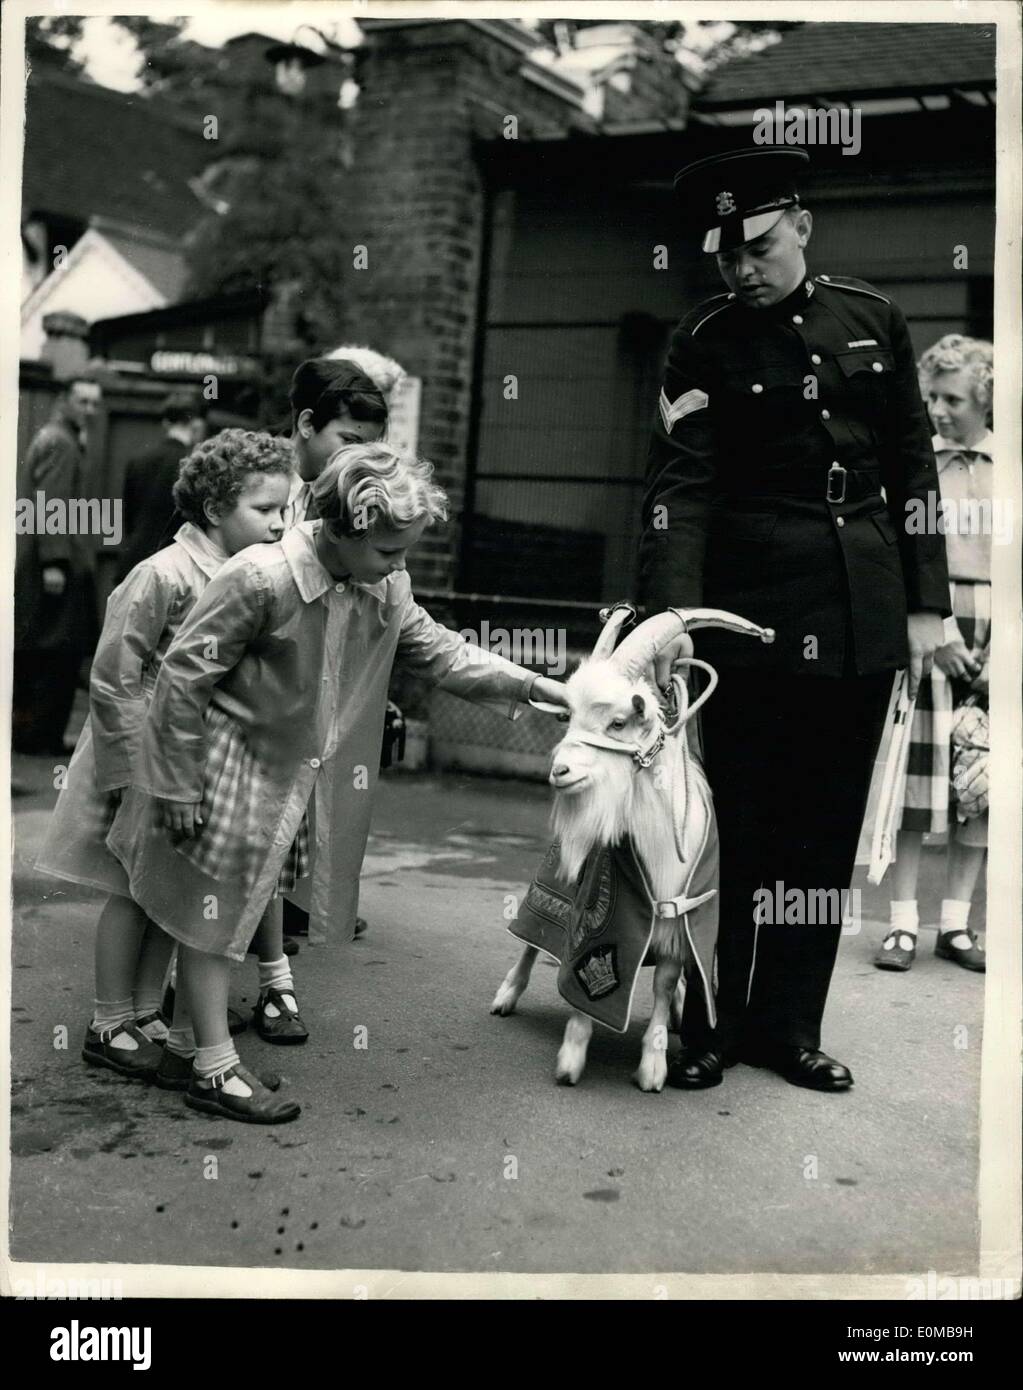 Jul. 10, 1954 - 10-7-54 Zoo goat becomes new mascot of the Welsh regiment. Handing over ceremony at the London Zoo. Taffy the Tenth, a young goat from the London Zoo, was handed over to Goat Major John Tullet to become the new regimental mascot of the First Battalion the Welsh Regiment. His predecessor died last year while serving with the battalion in Hong Kong. For today's occasion, Goat Major Tullet has come all the way from Hong Kong, where the regiment now is, to collect Taffy and instruct him in his regimental duties before the regiment returns to Britain at the end of the year Stock Photo